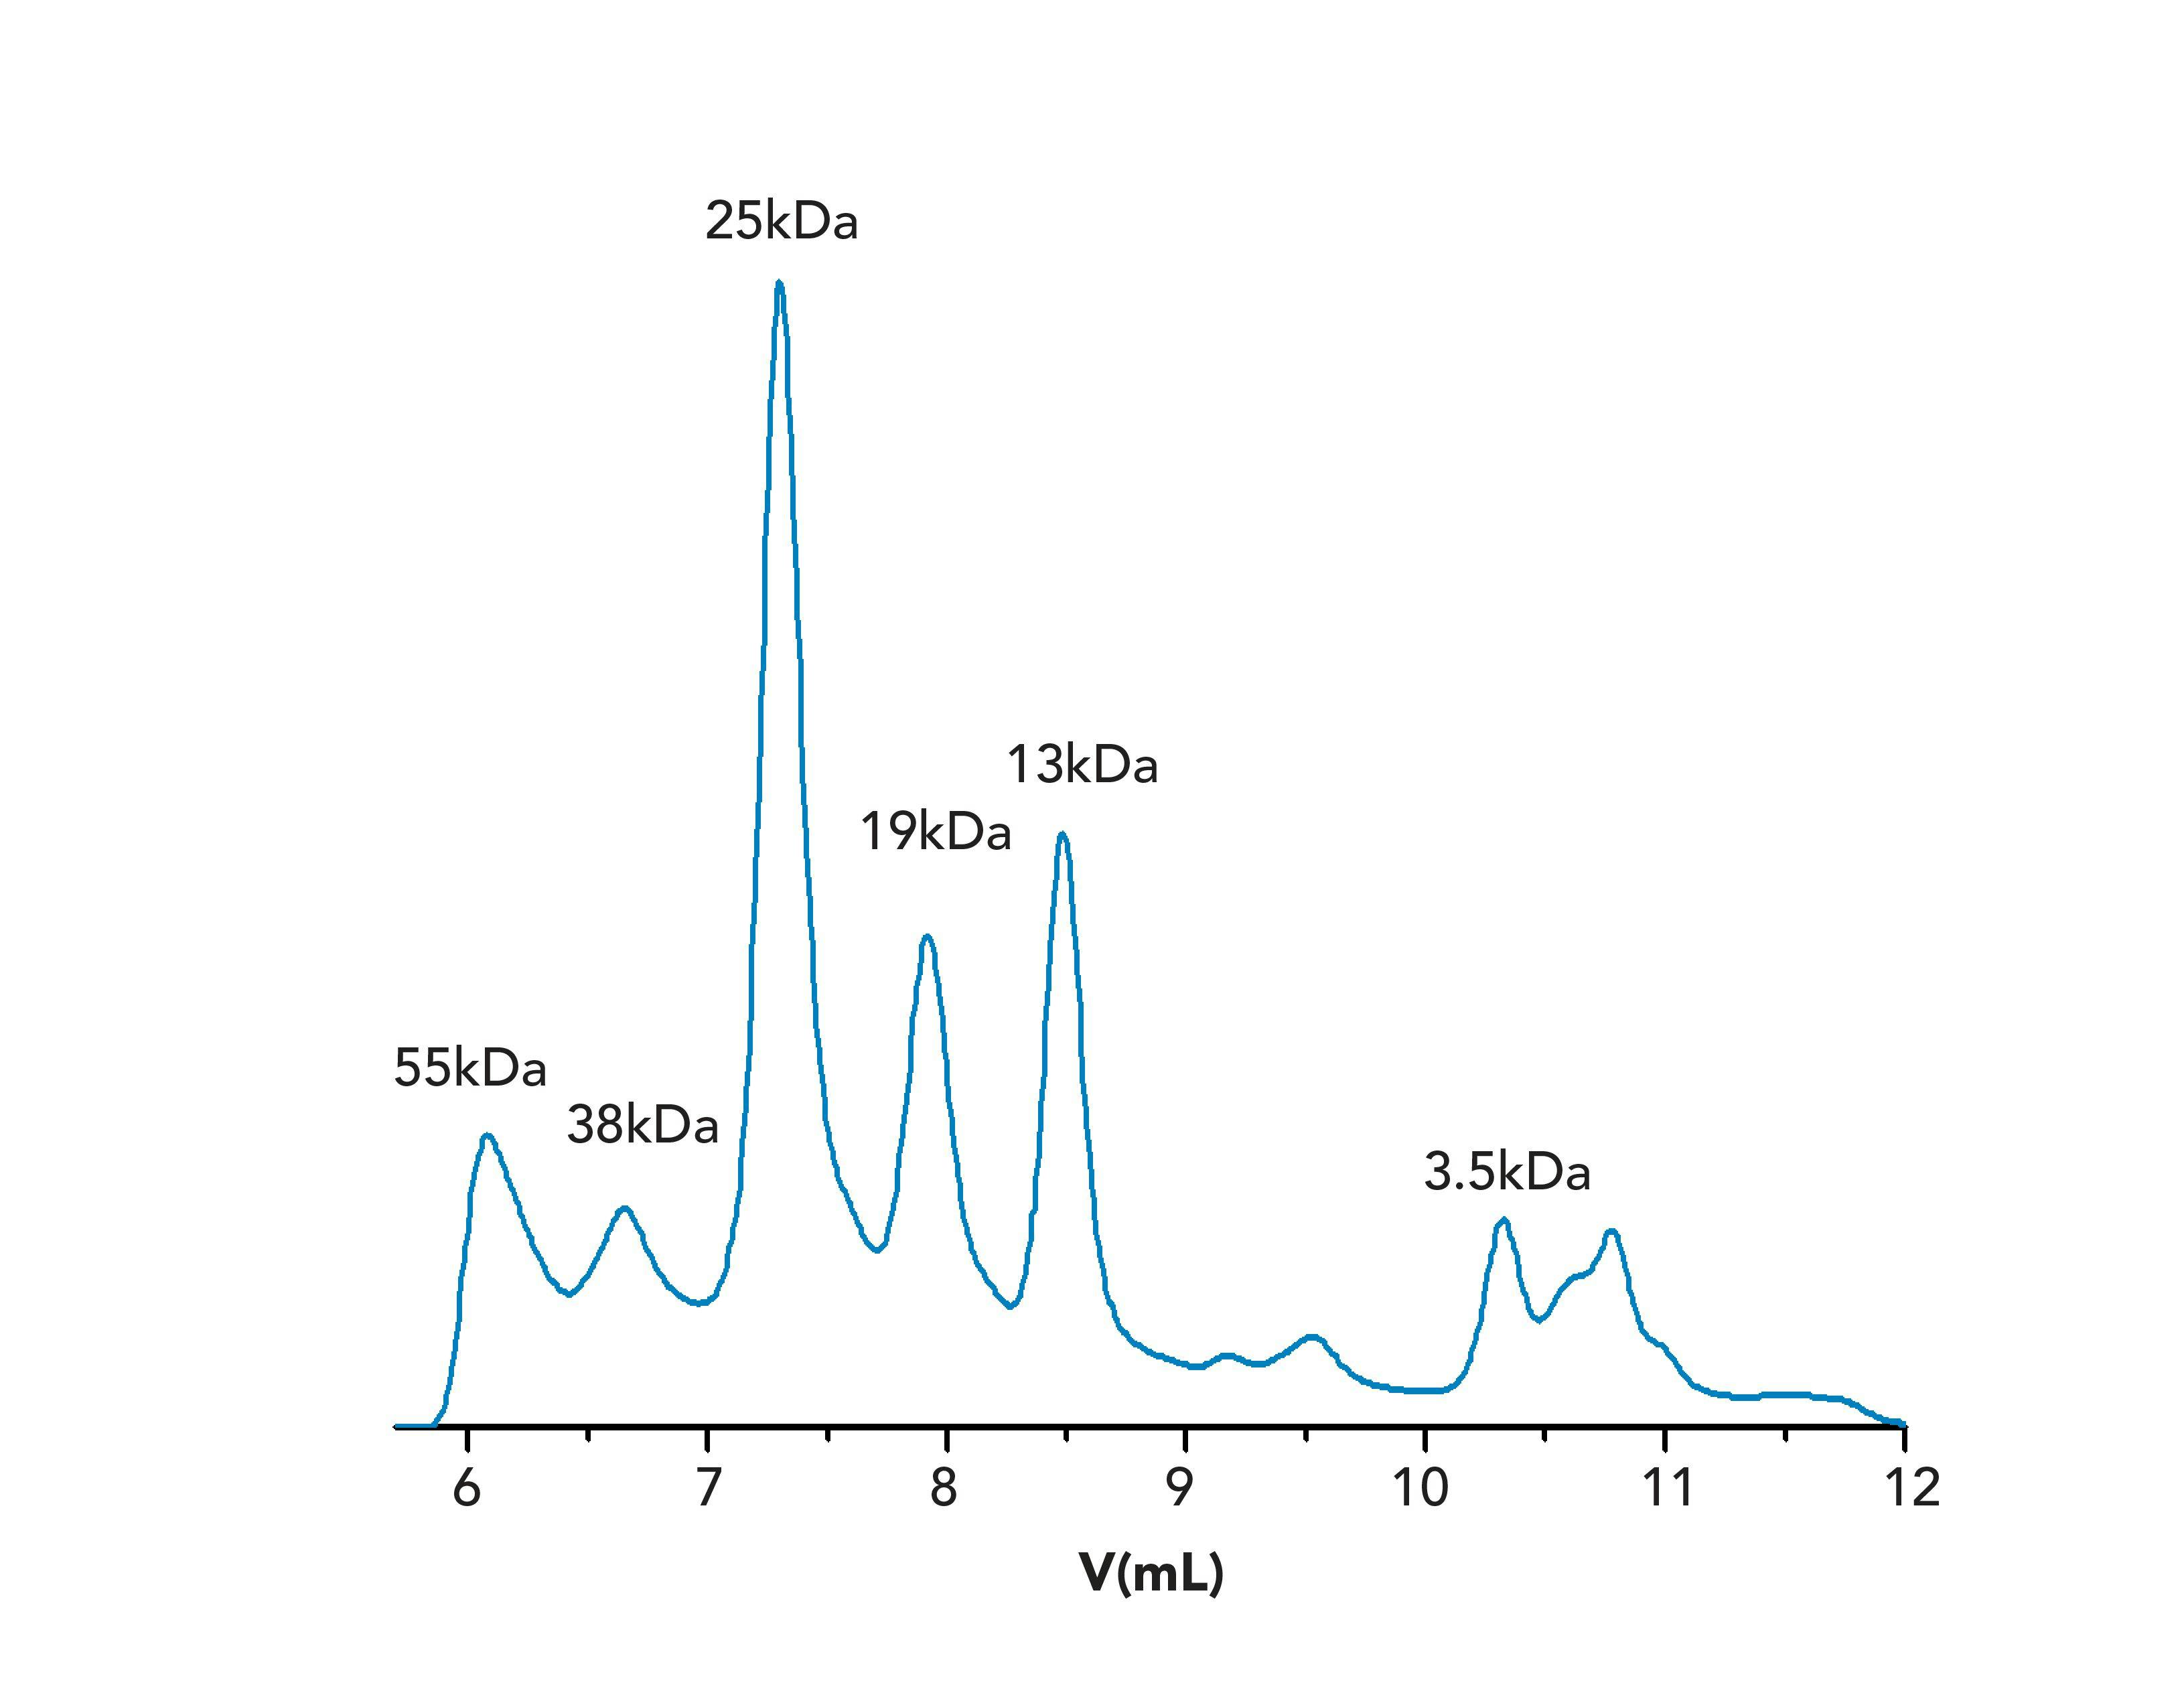 FIGURE 1: Chromatogram of the CNBr peptides sample on the PSS Proteema column with peak molar masses as indicated by supplier. Please note that on some columns the peak corresponding to a molar mass of 55 kDa is not as effectively separated as shown here, due to elution close to the exclusion limit.